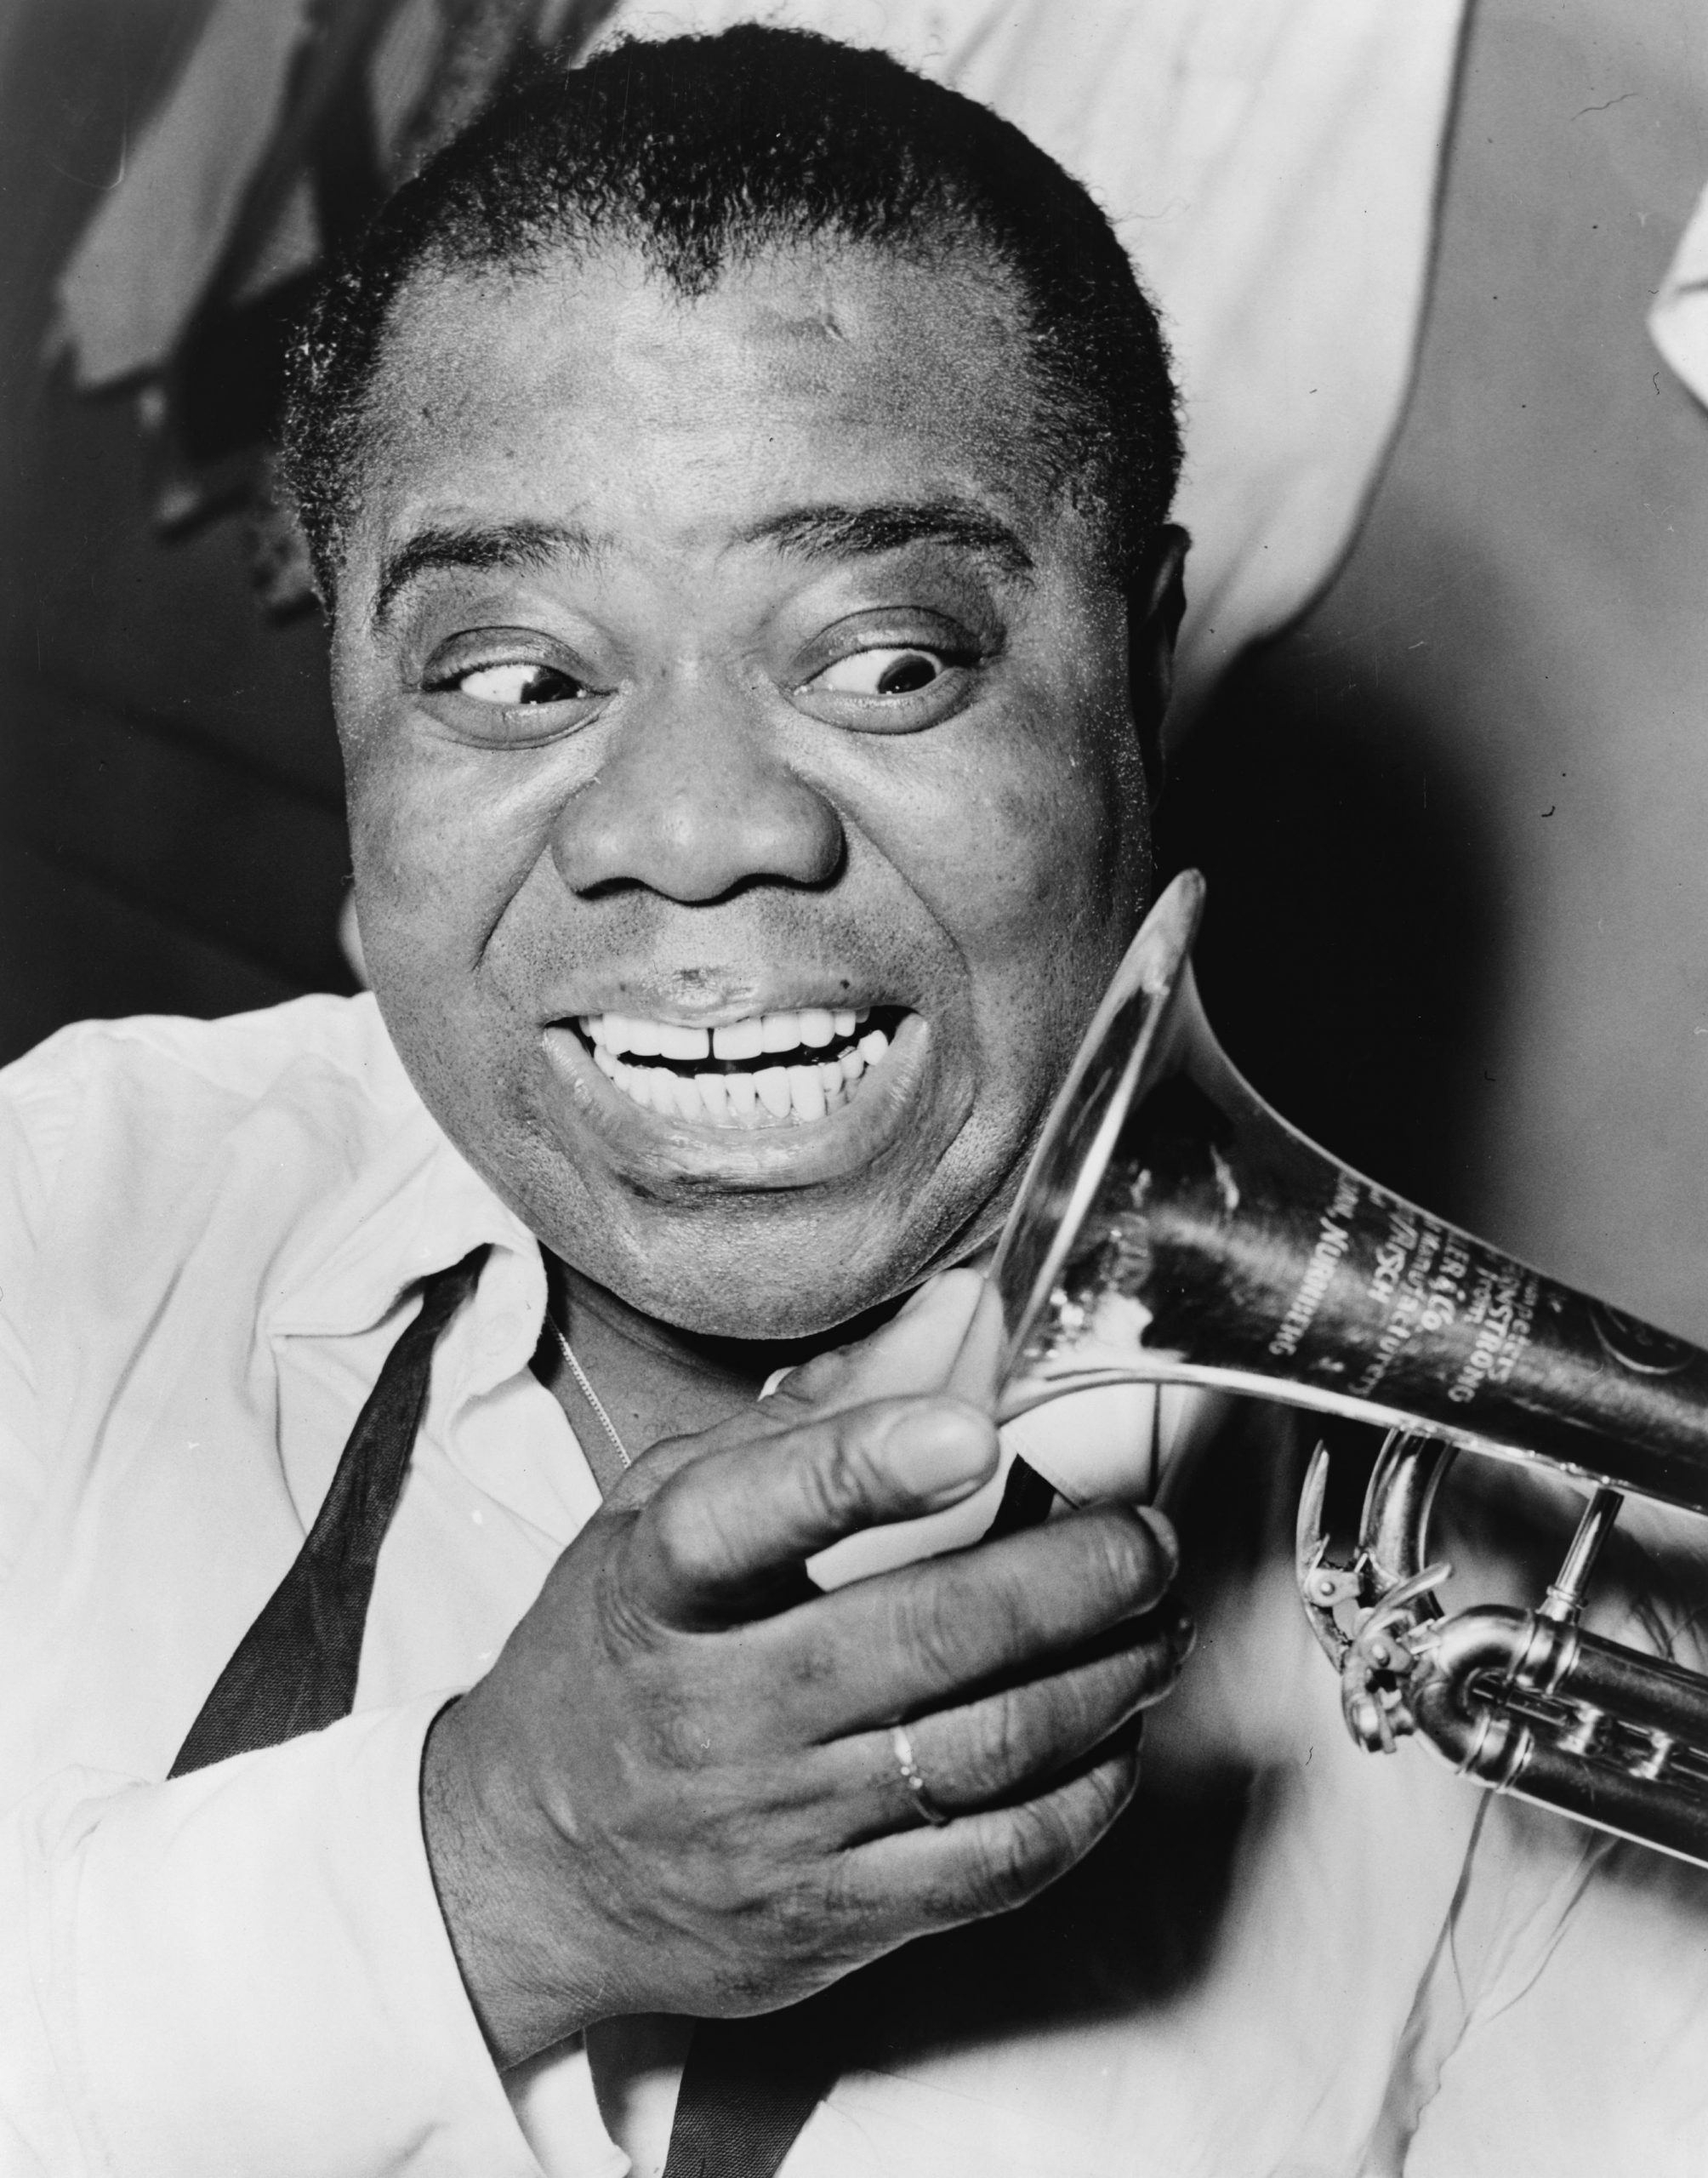 sindrome satchmo louis armstrong